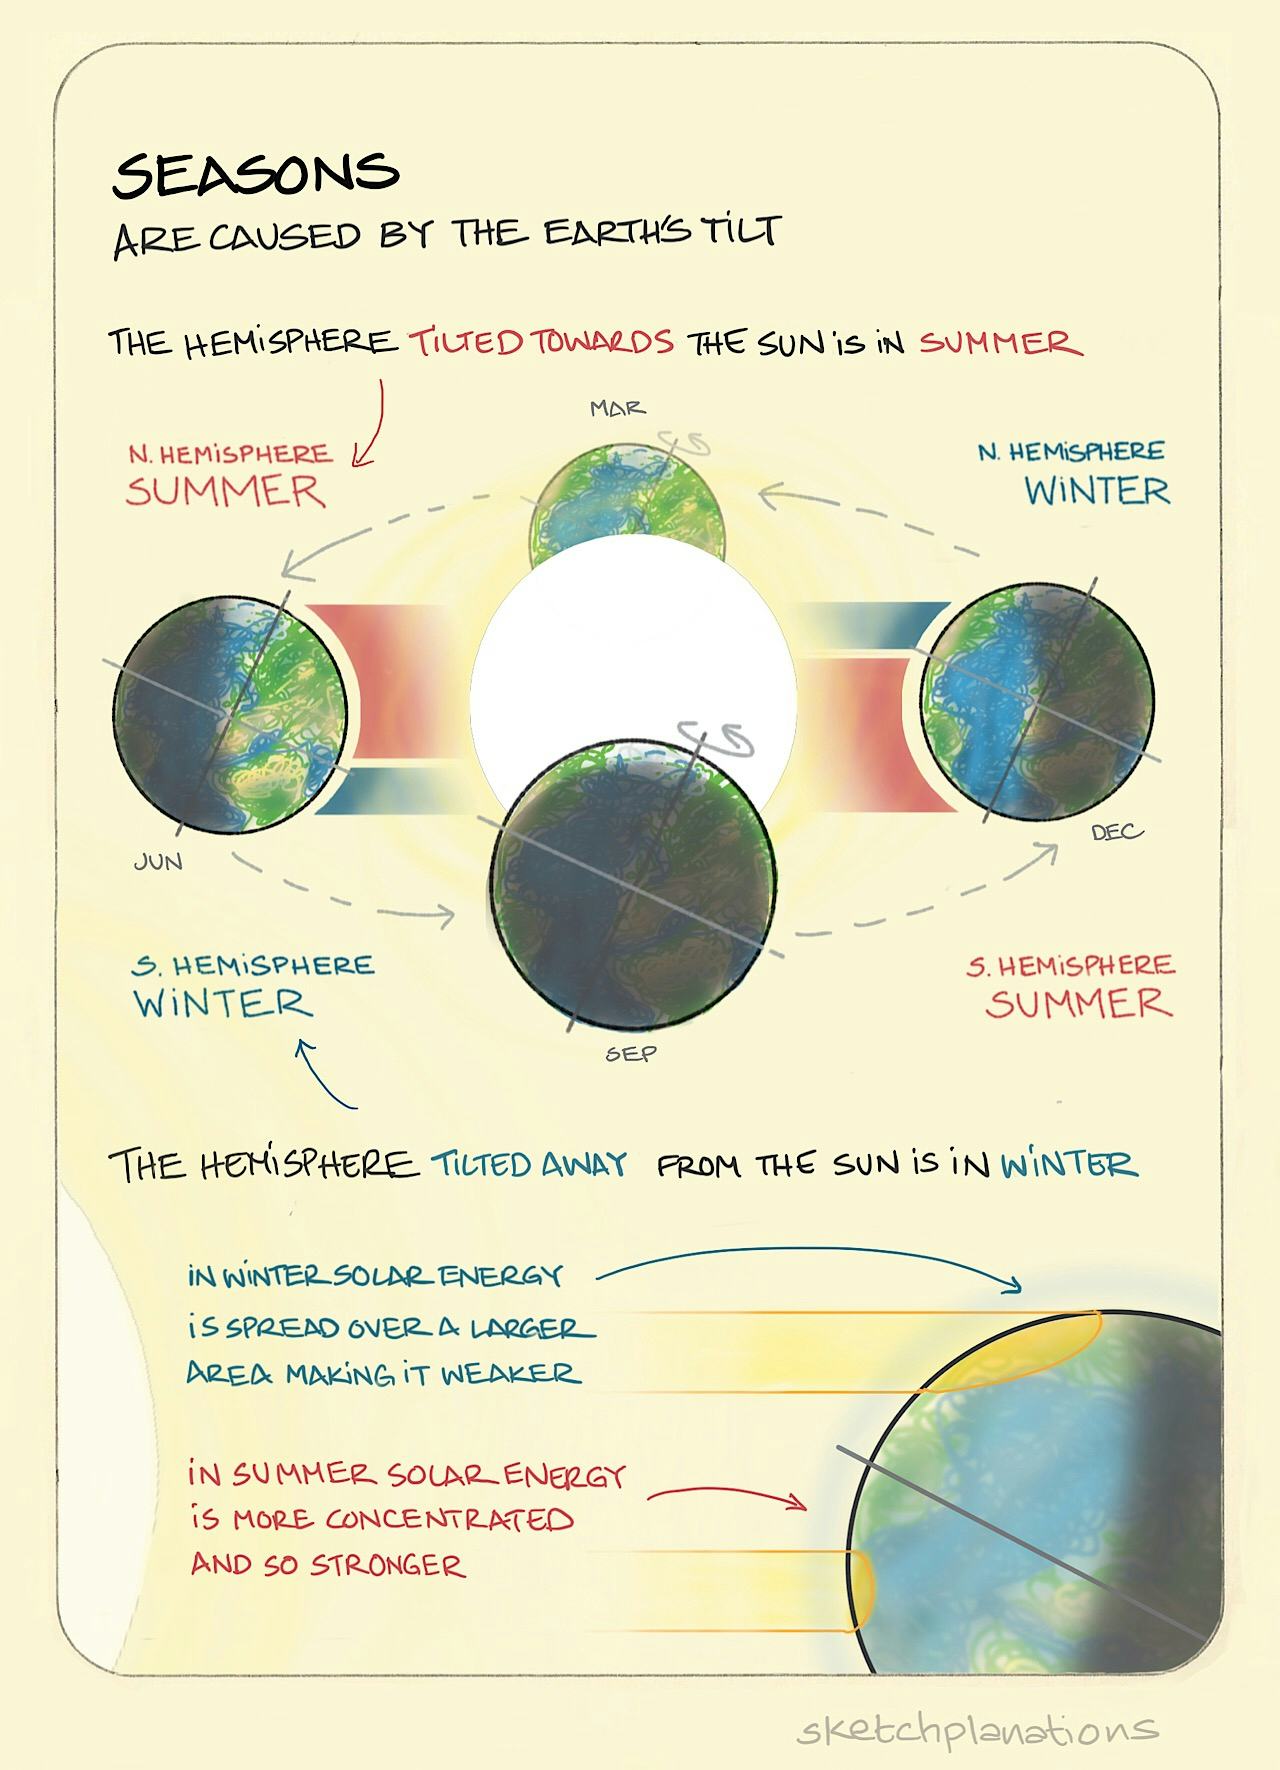 Seasons illustration showing how it is caused by the earths tilt: The earth in different positions around the sun including showing the tile of its axis which causes more or less concentrated light to hit at different times of the year, causing seasons